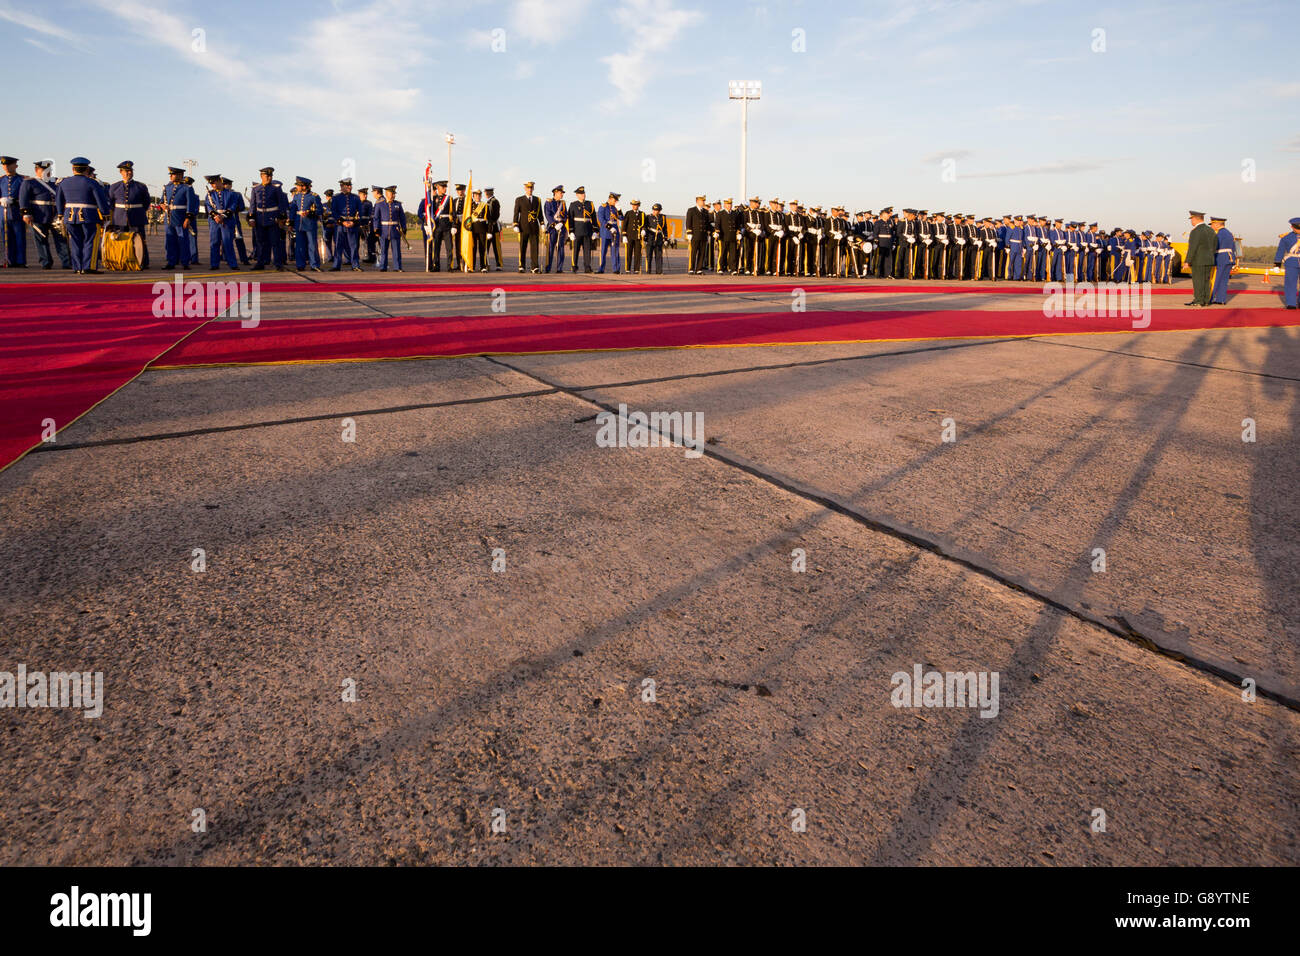 Asuncion, Paraguay. 30th June, 2016. Paraguay's honour guards are seen before the departure ceremony for Taiwan's (Republic of China)  President Tsai Ing-wen, Silvio Pettirossi International Airport, Luque, Paraguay. Credit:  Andre M. Chang/ARDUOPRESS/Alamy Live News Stock Photo